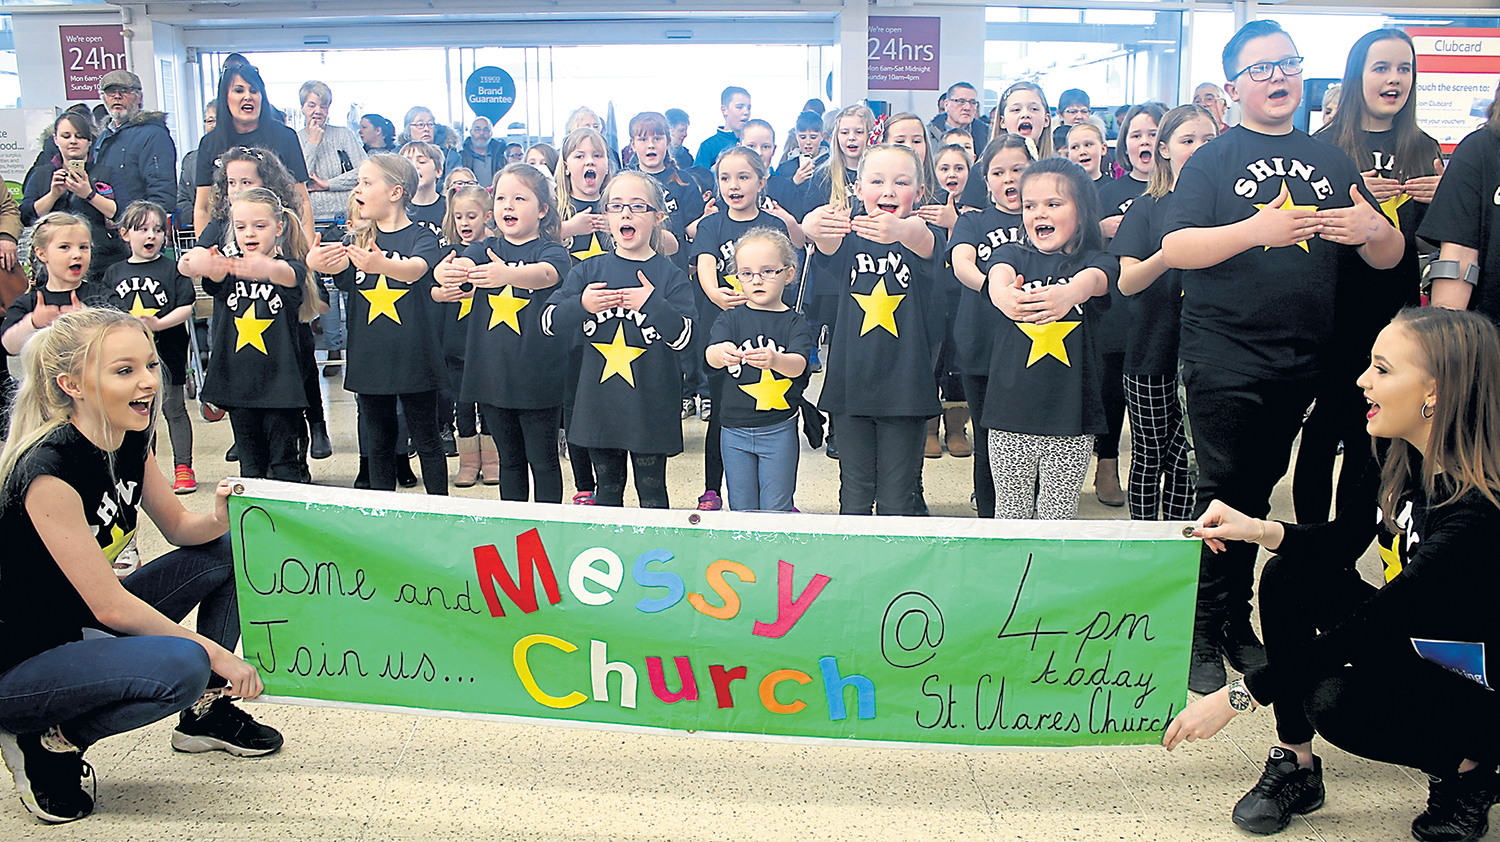 St Clare’s Flash Mob in Tesco & Messy Church